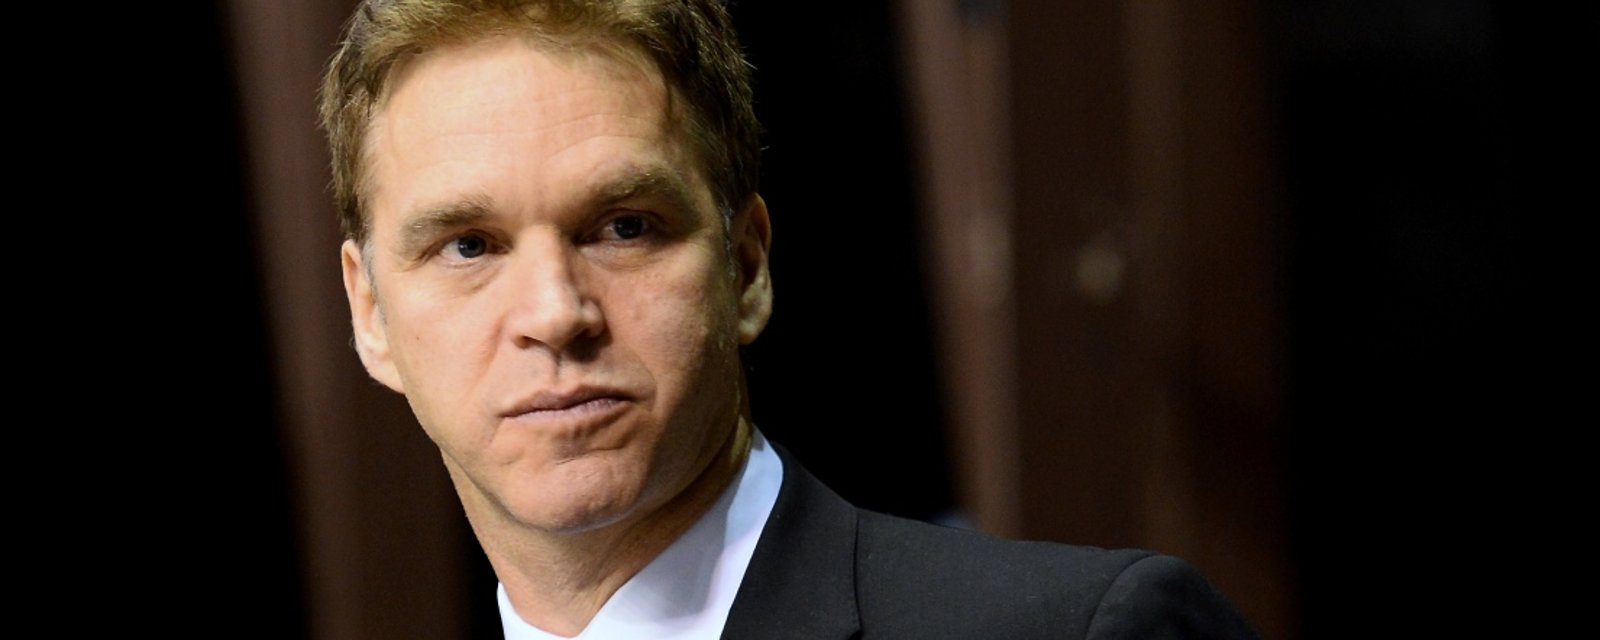 Wife of Luc Robitaille claims Donald Trump was “aggressive” with her.